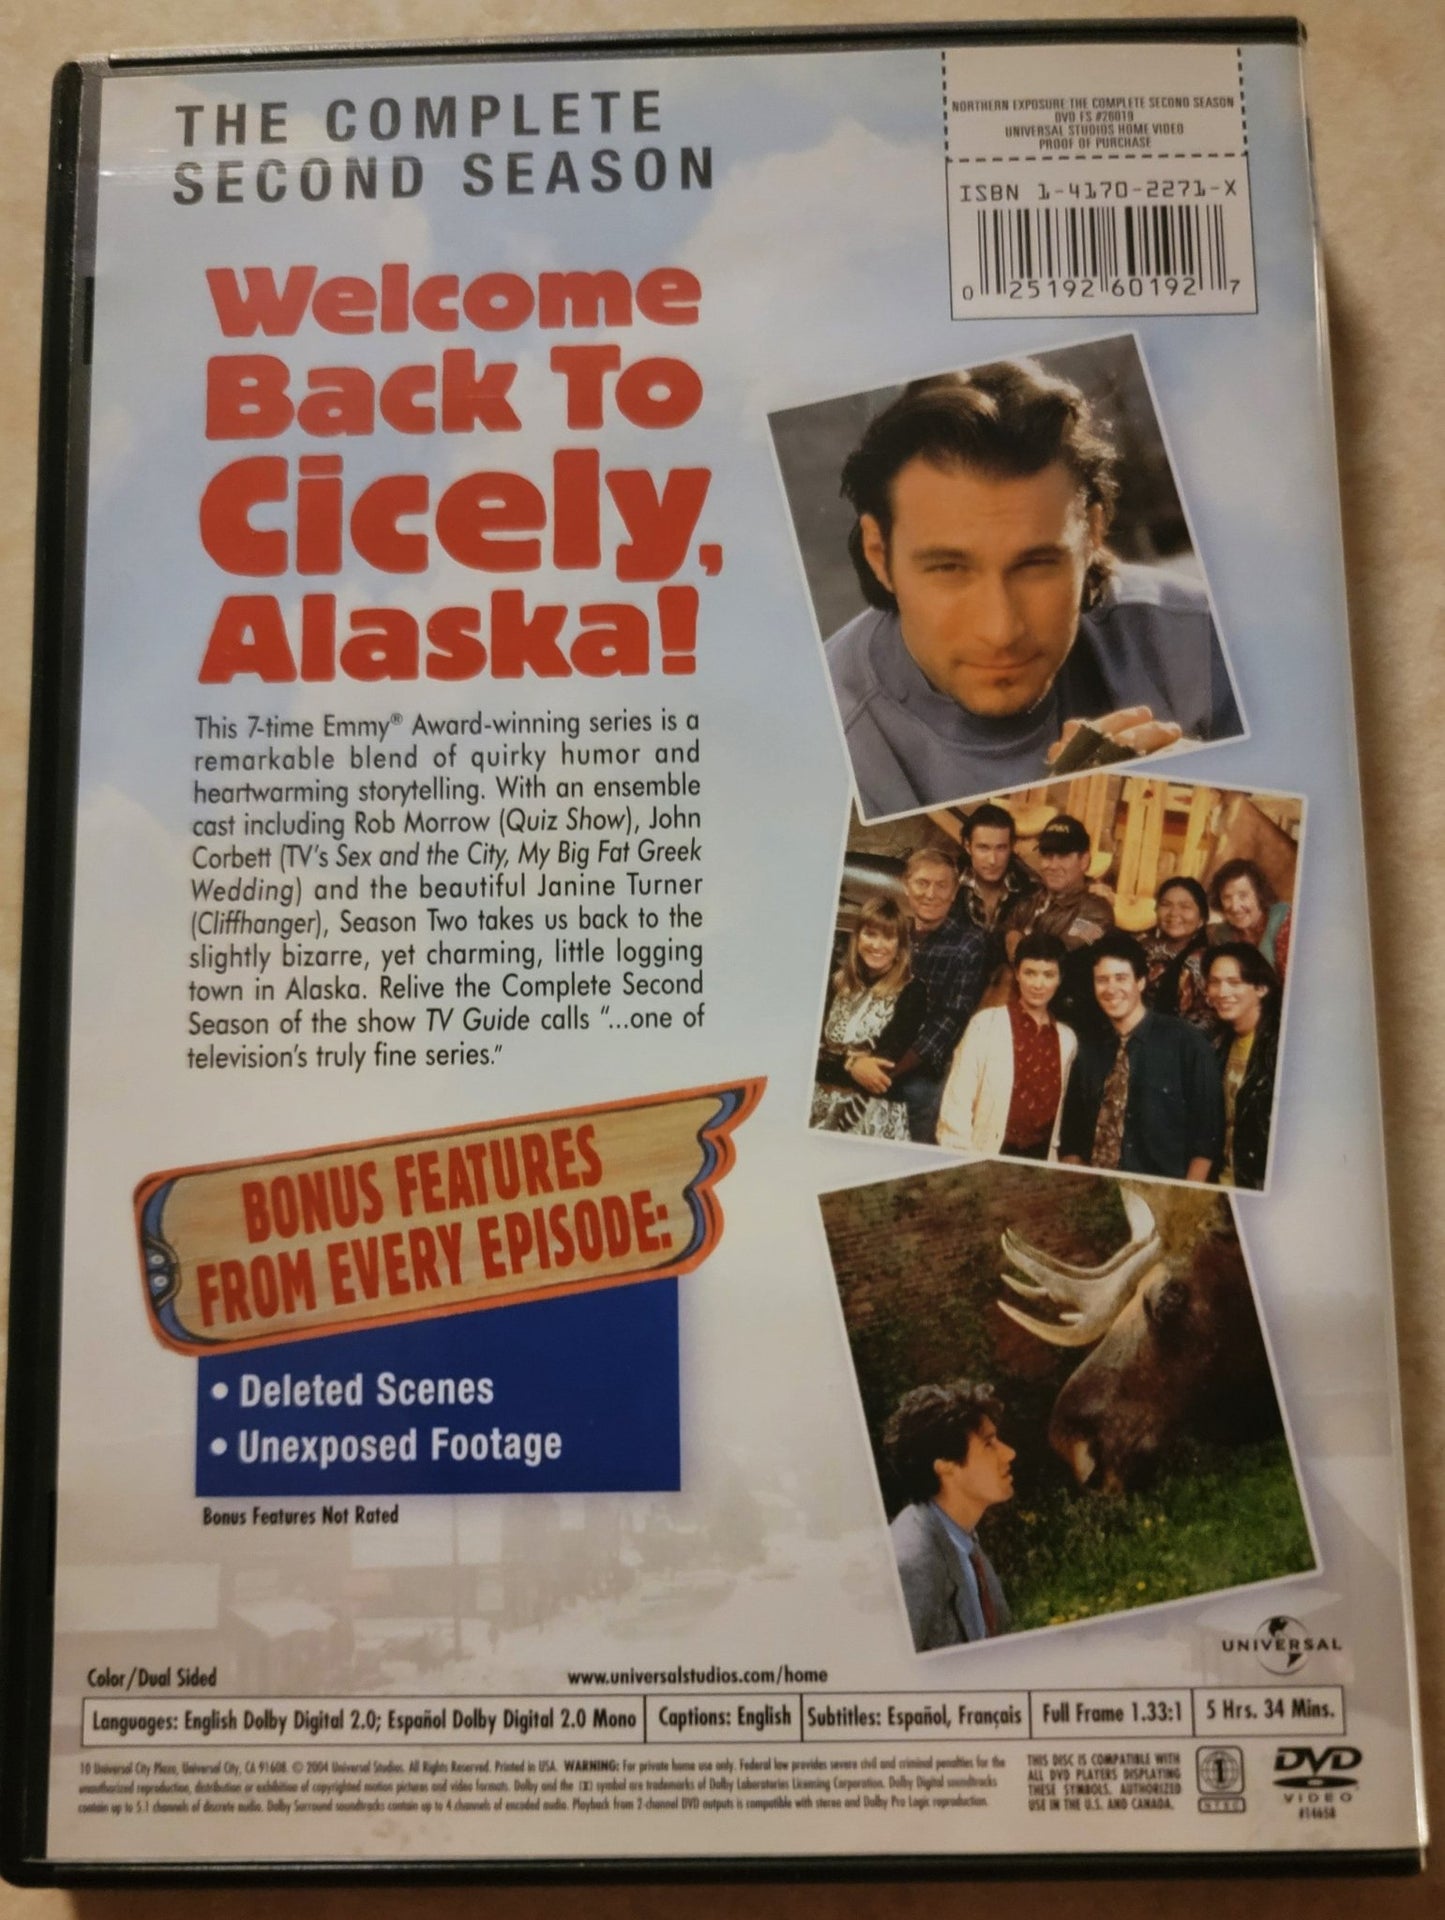 Universal Pictures Home Entertainment - Northern Exposure | DVD | The Complete Second - Novelty Parka Yellow Cover - DVD - Steady Bunny Shop